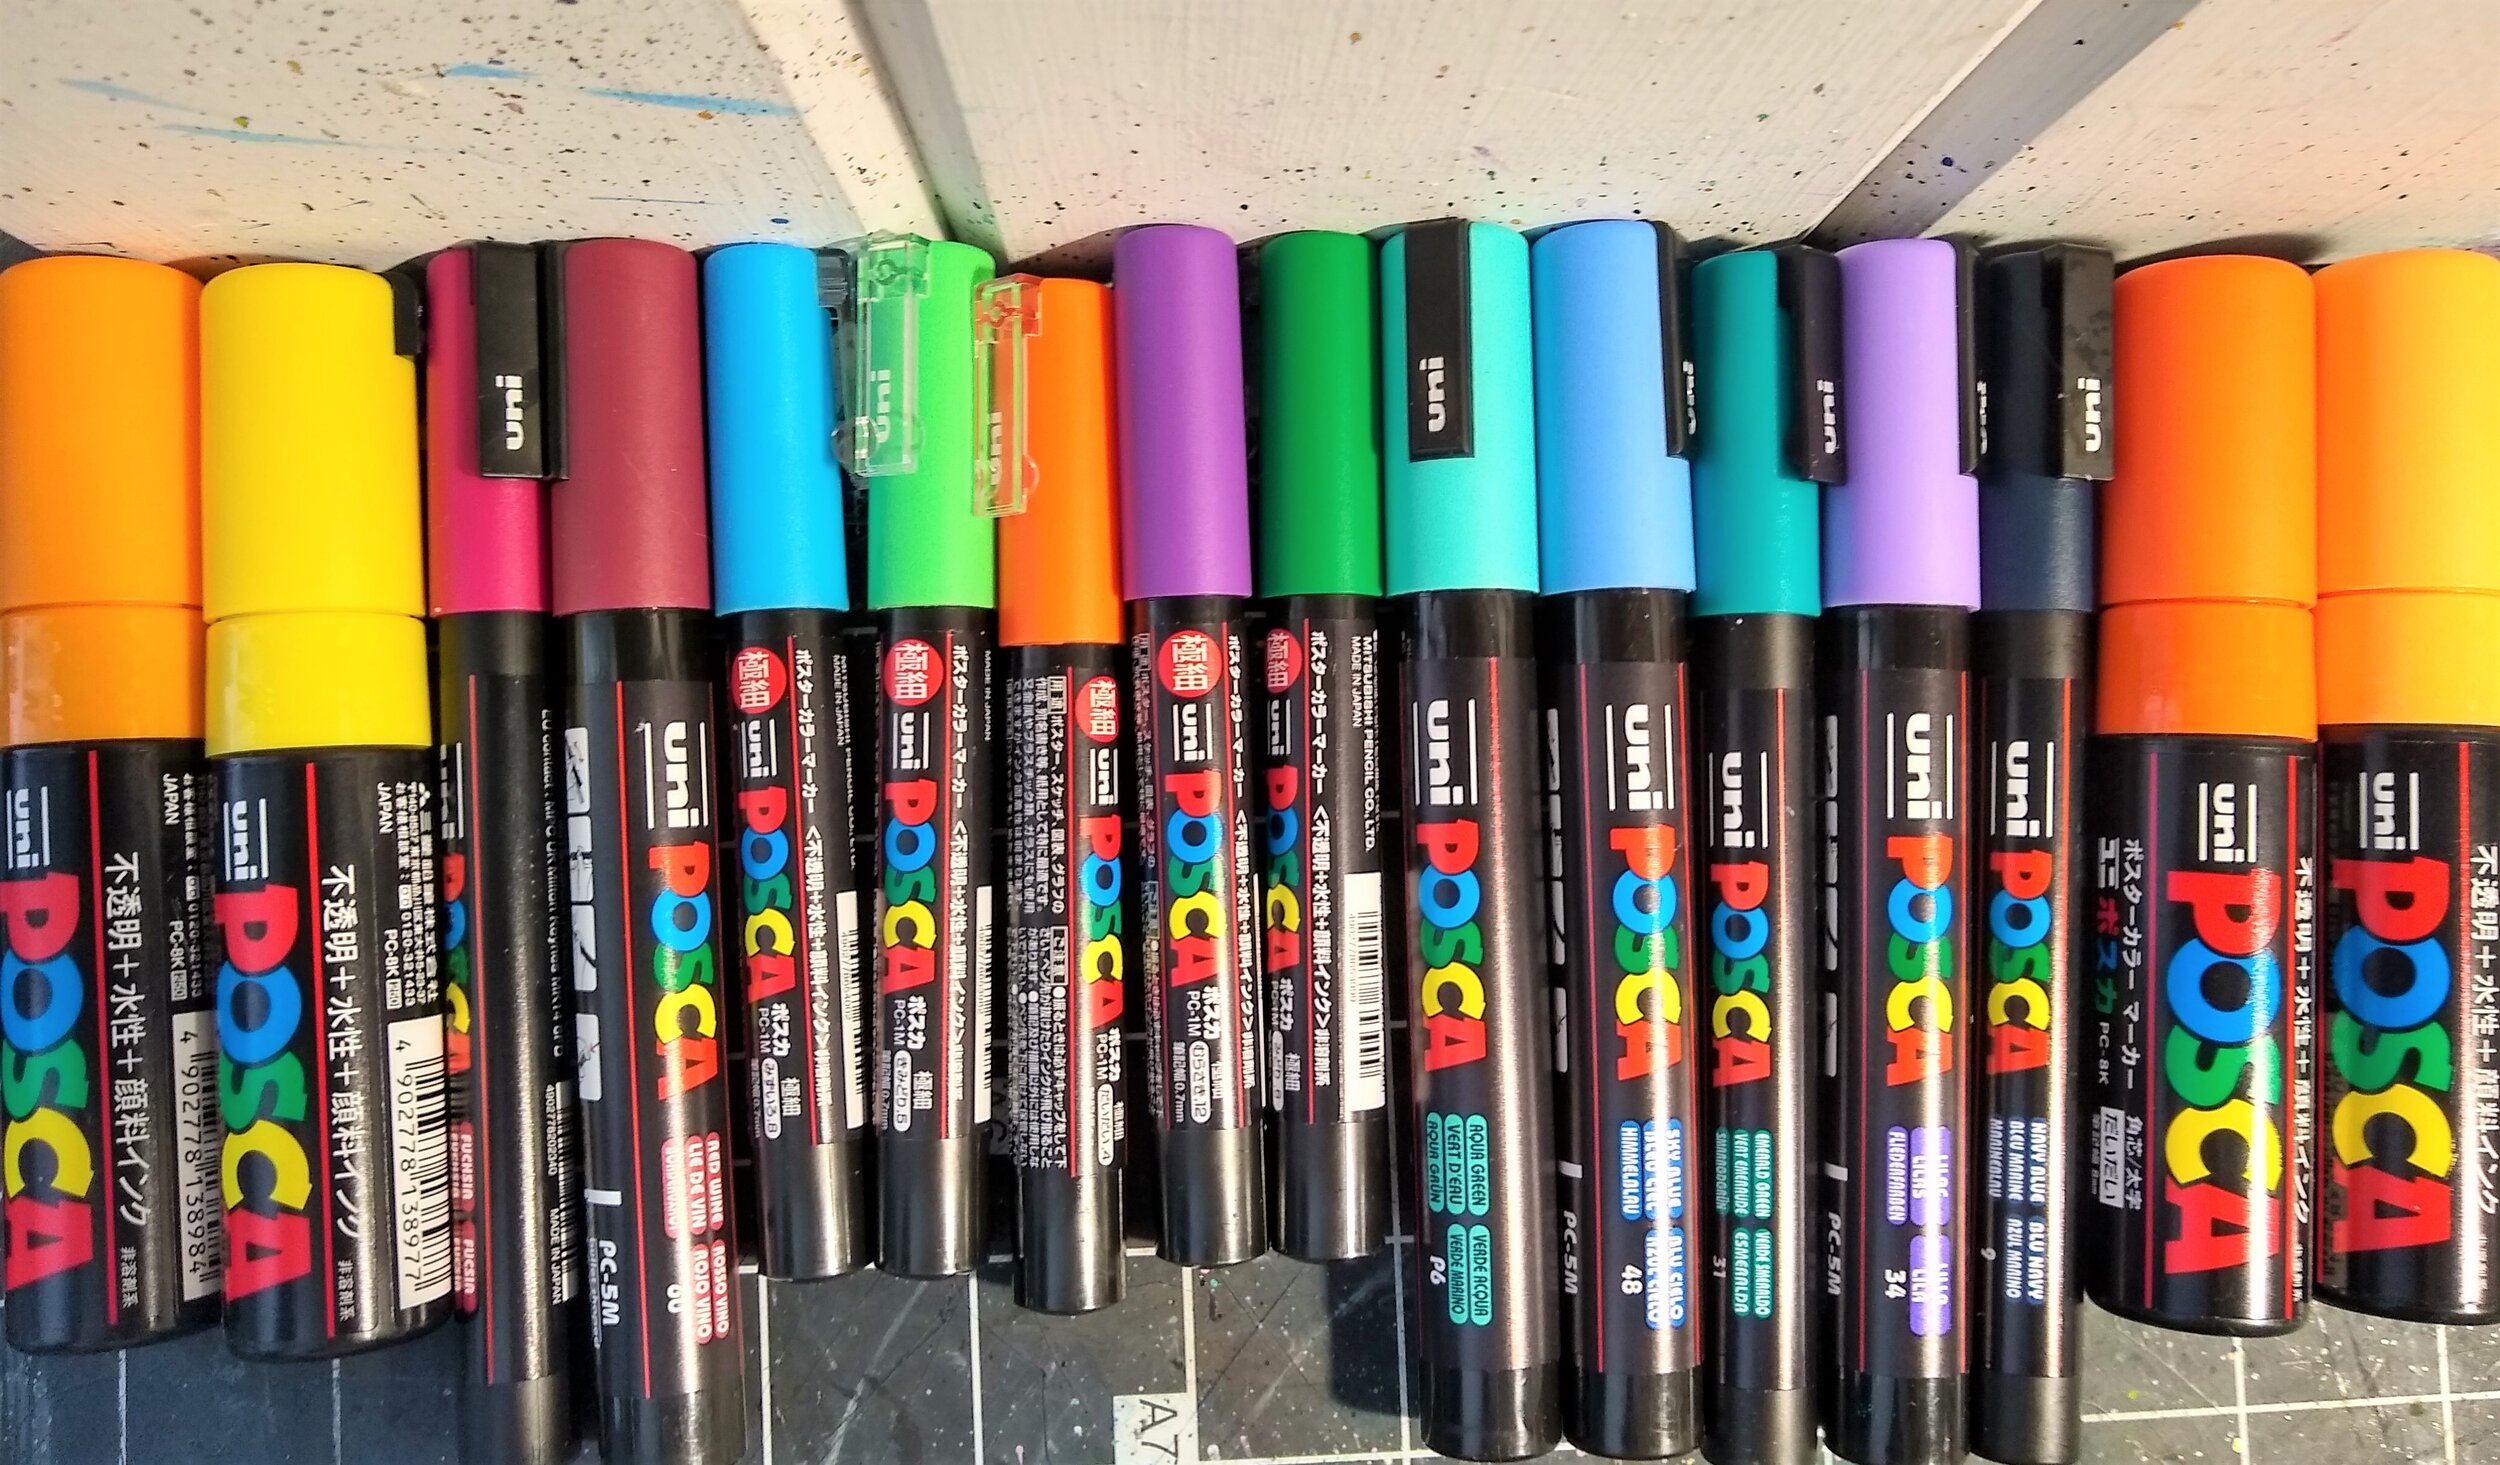 My All-Time Favorite Art Supplies (for now) — Art Over Easy